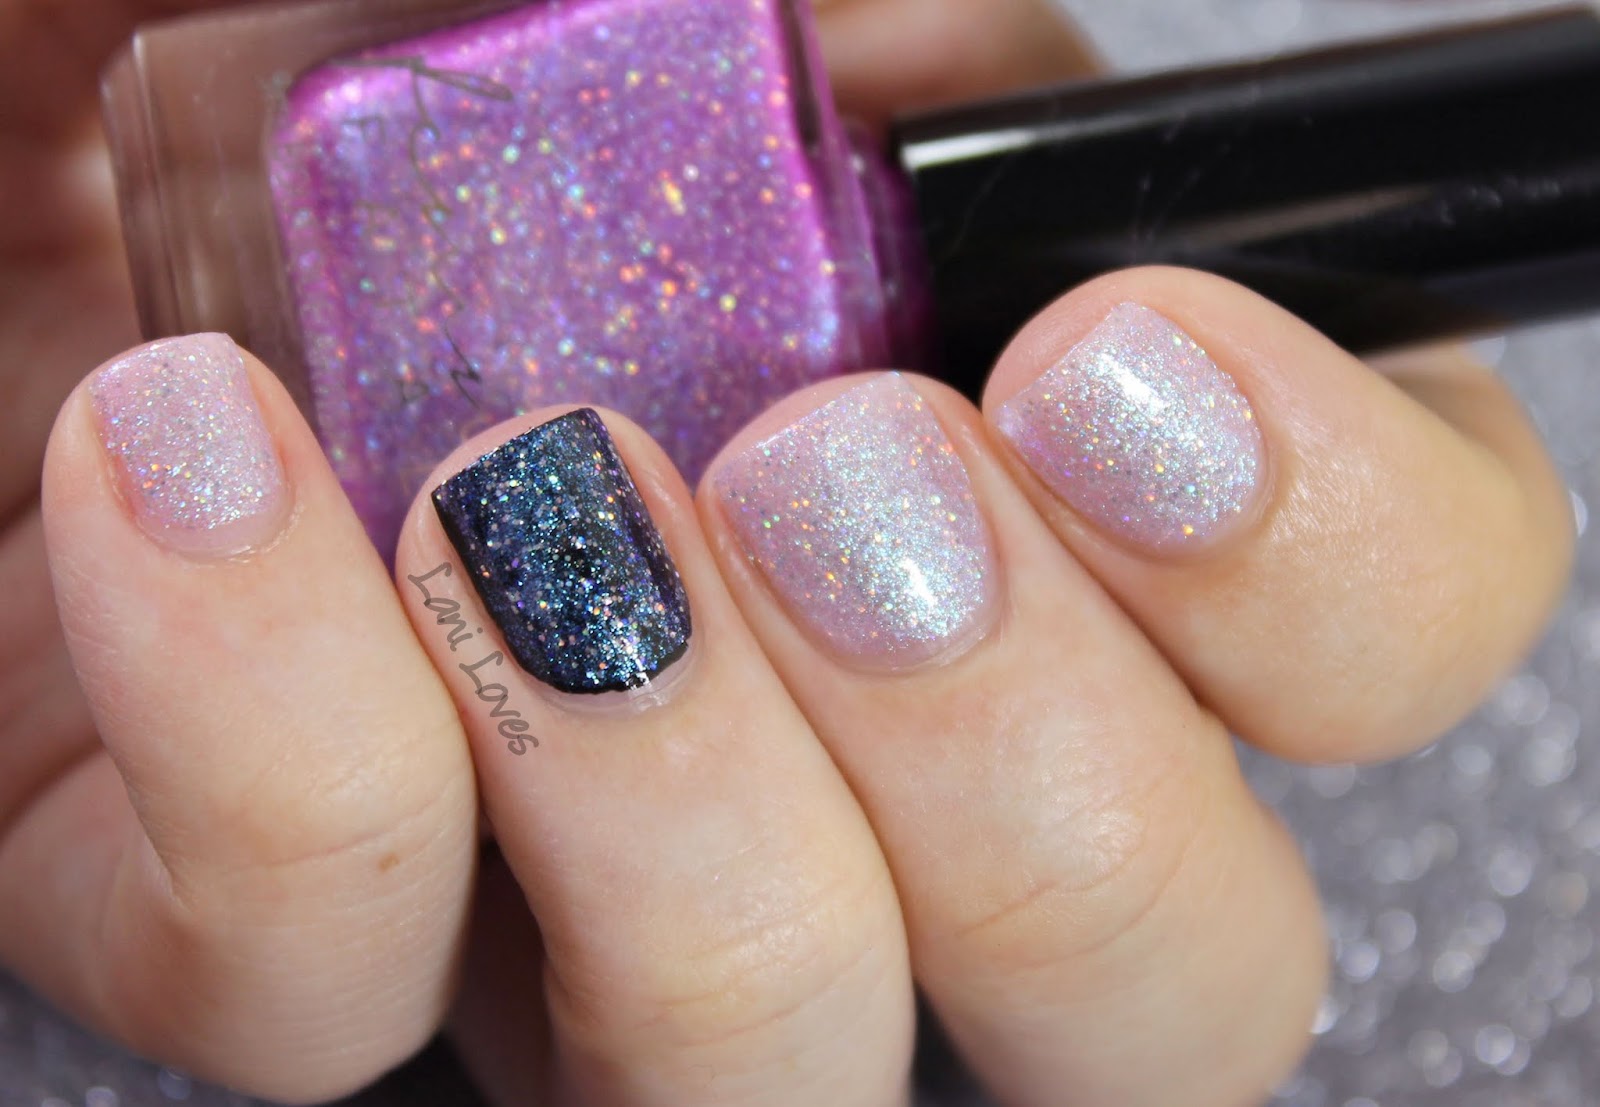 Femme Fatale Cosmetics - Who is Fairest of Them All nail polish swatches & review